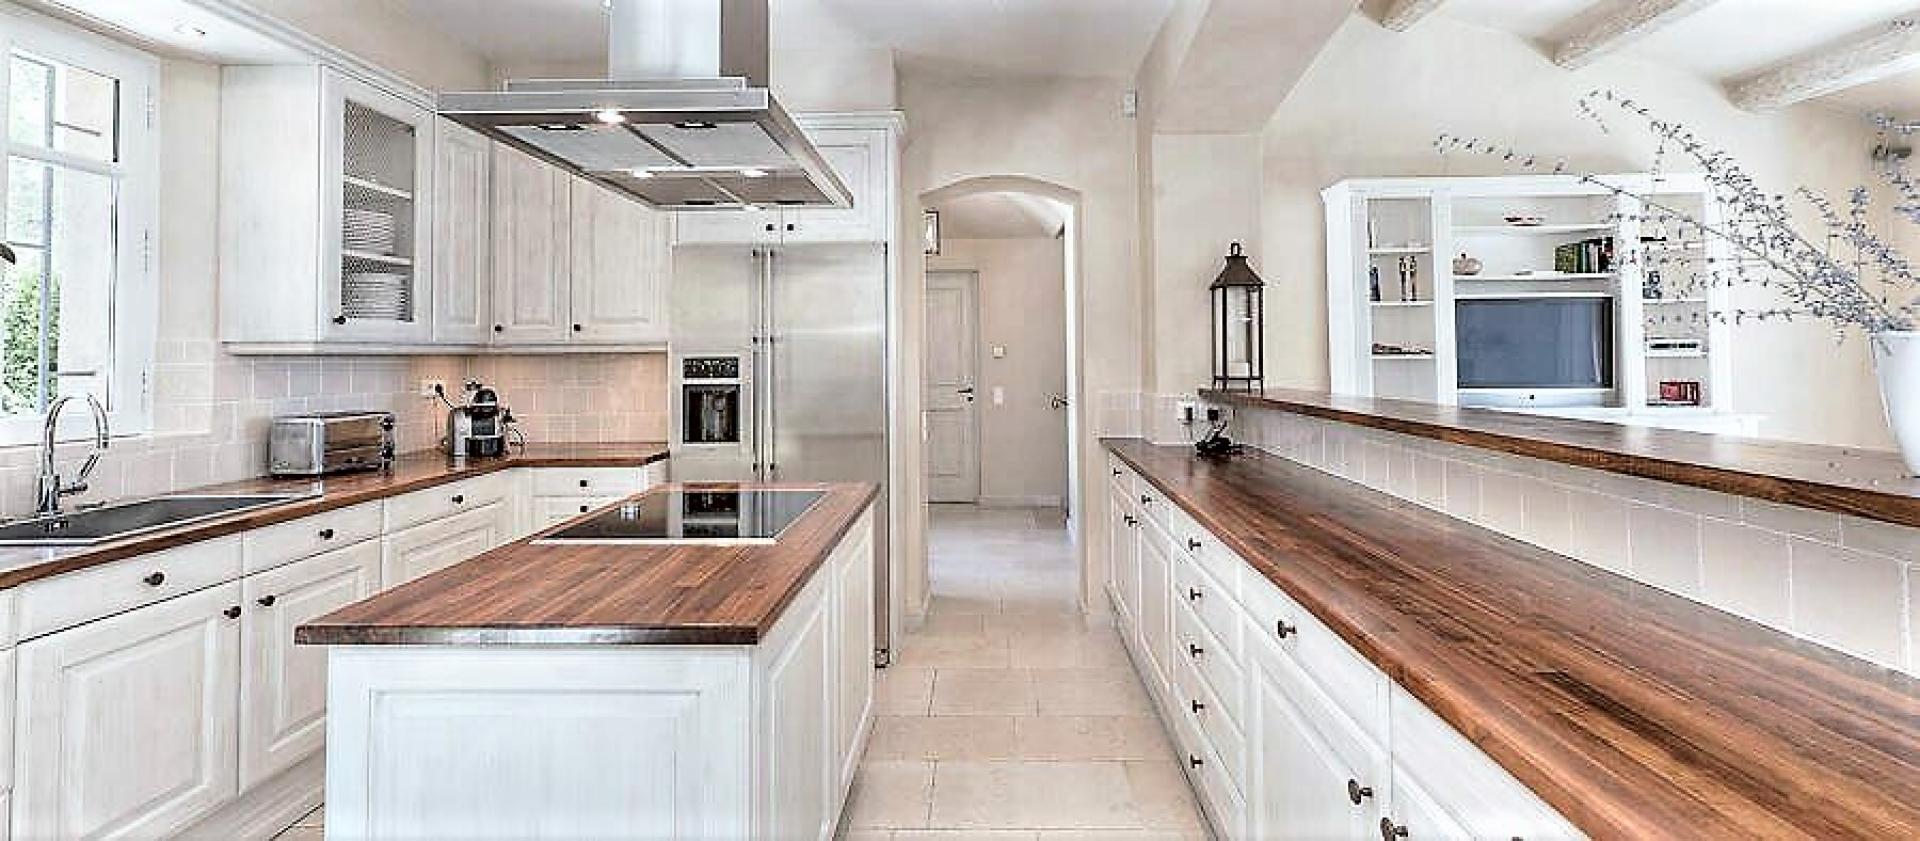 Very well equipped kitchen in a villa to rent for holidays in Saint Tropez